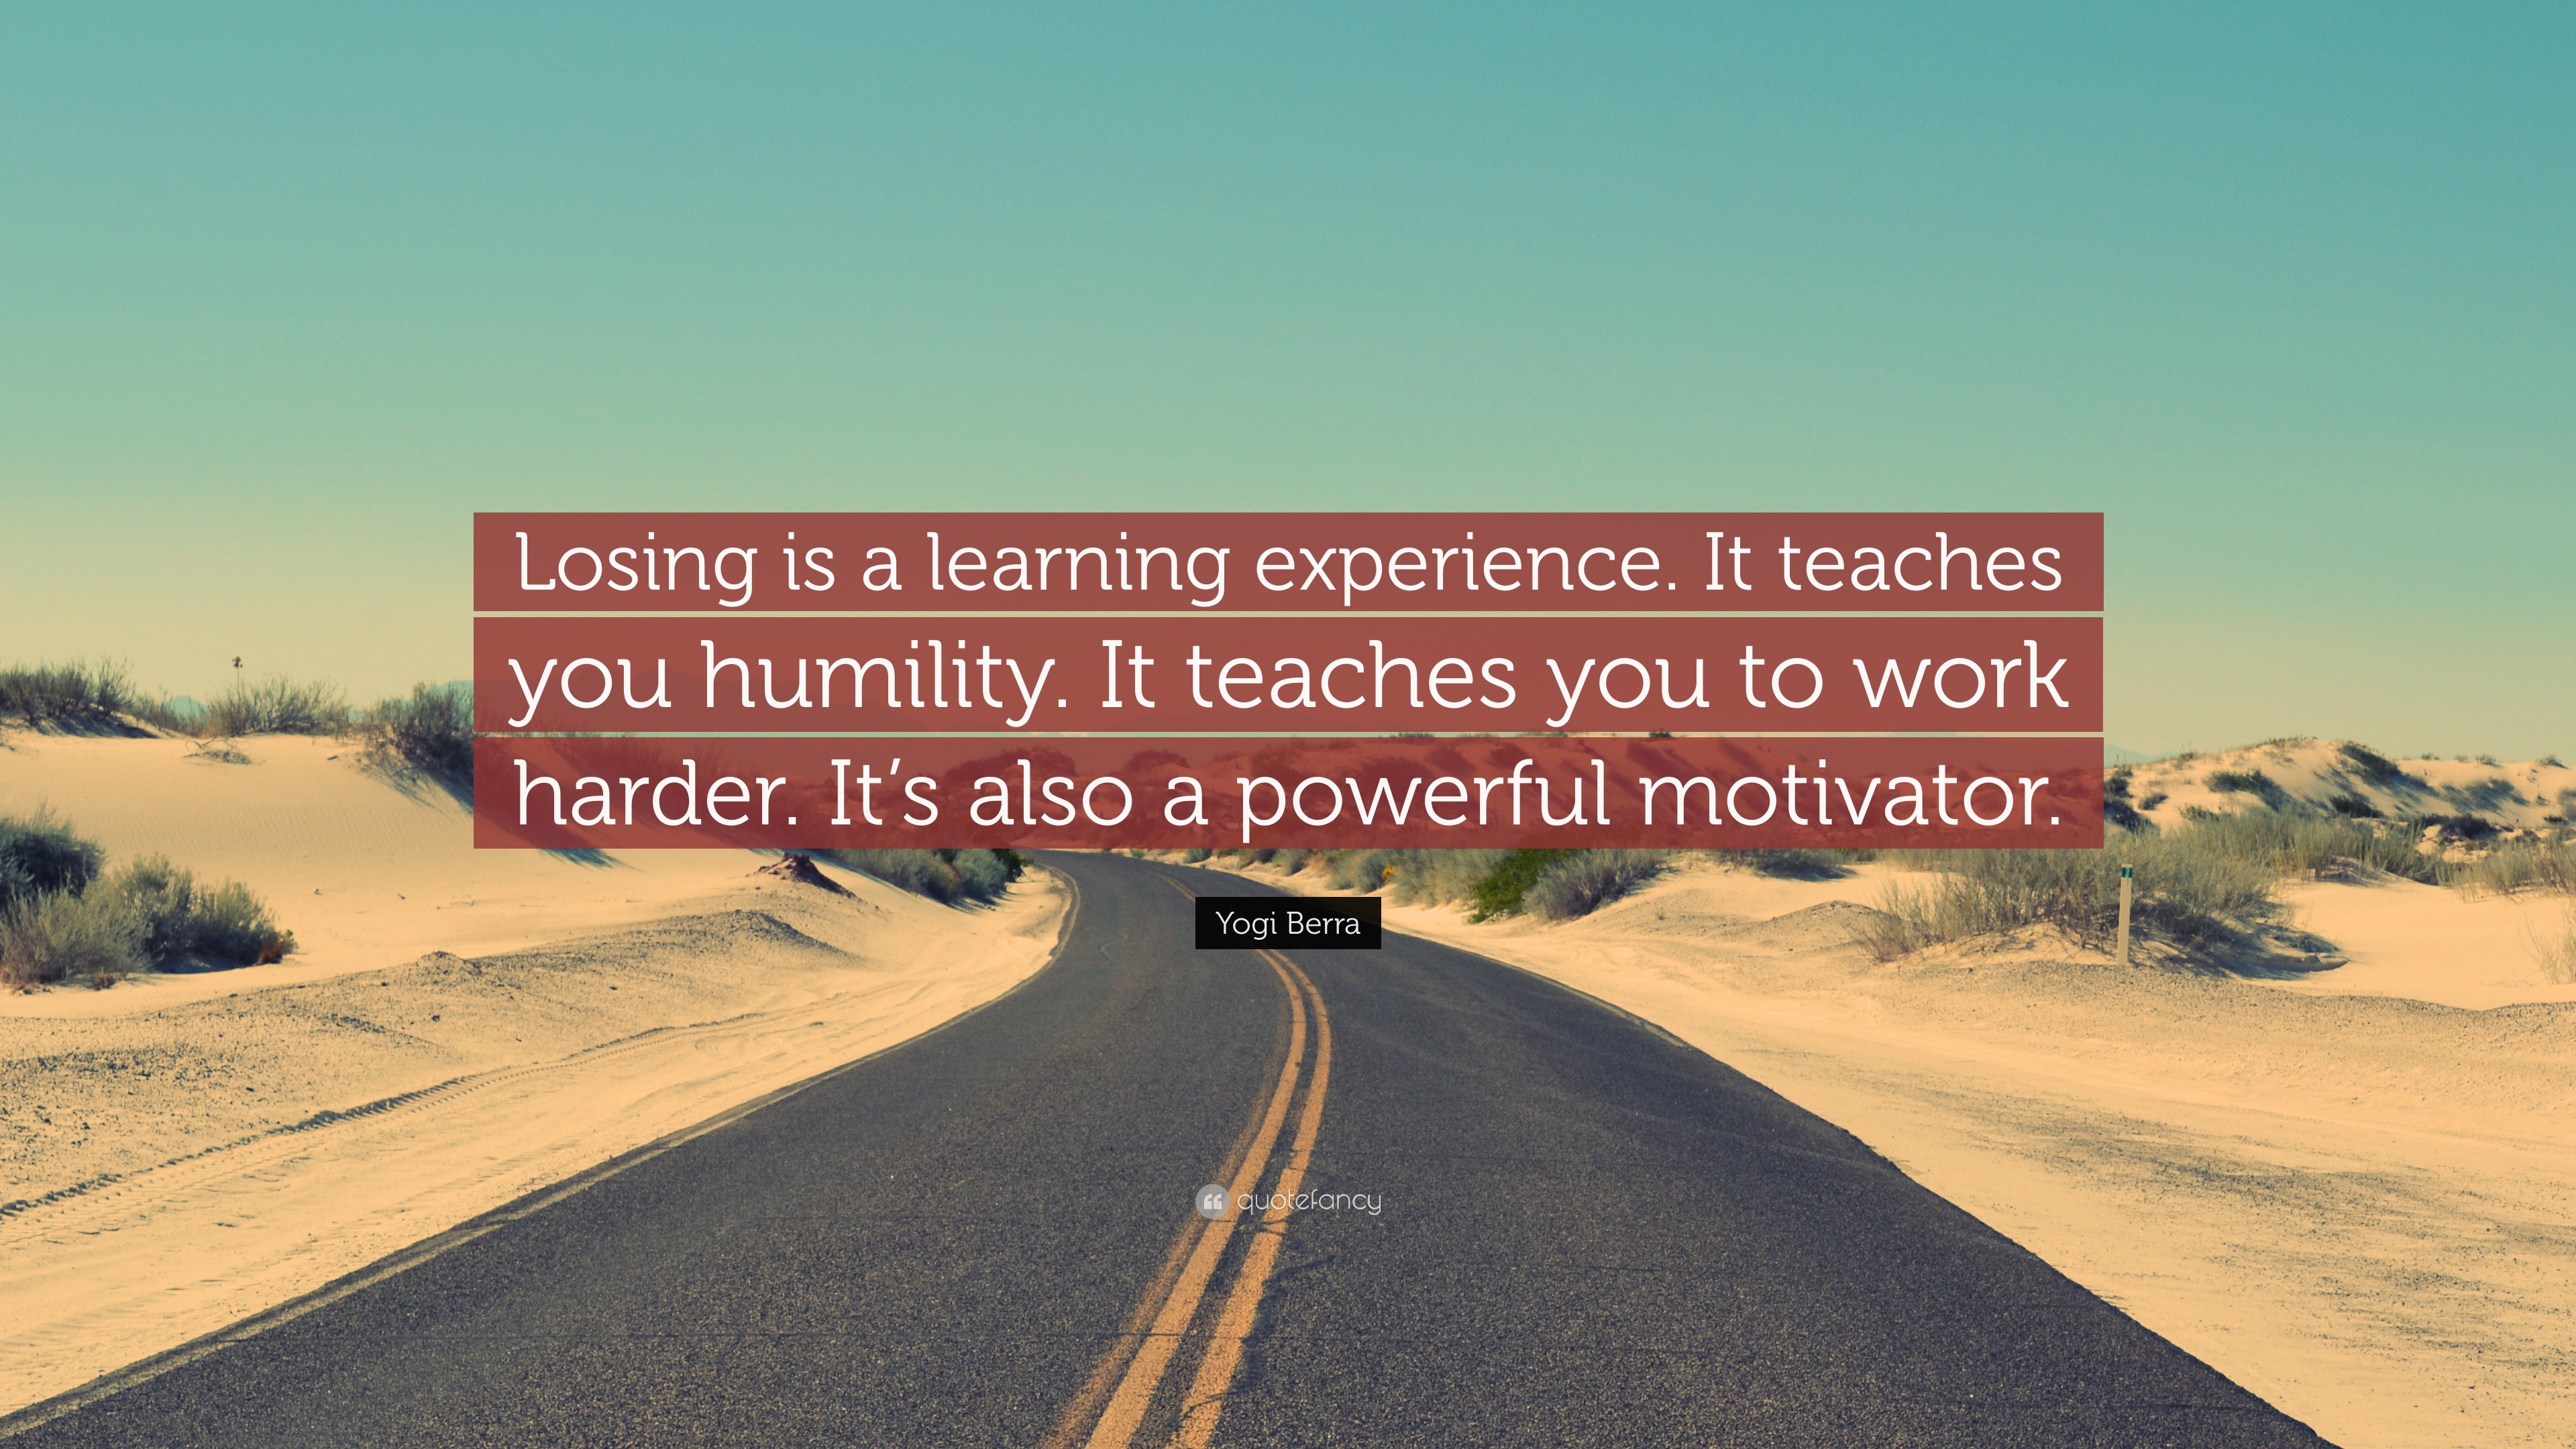 Yogi Berra quote: Losing is a learning experience. It teaches you humility.  It